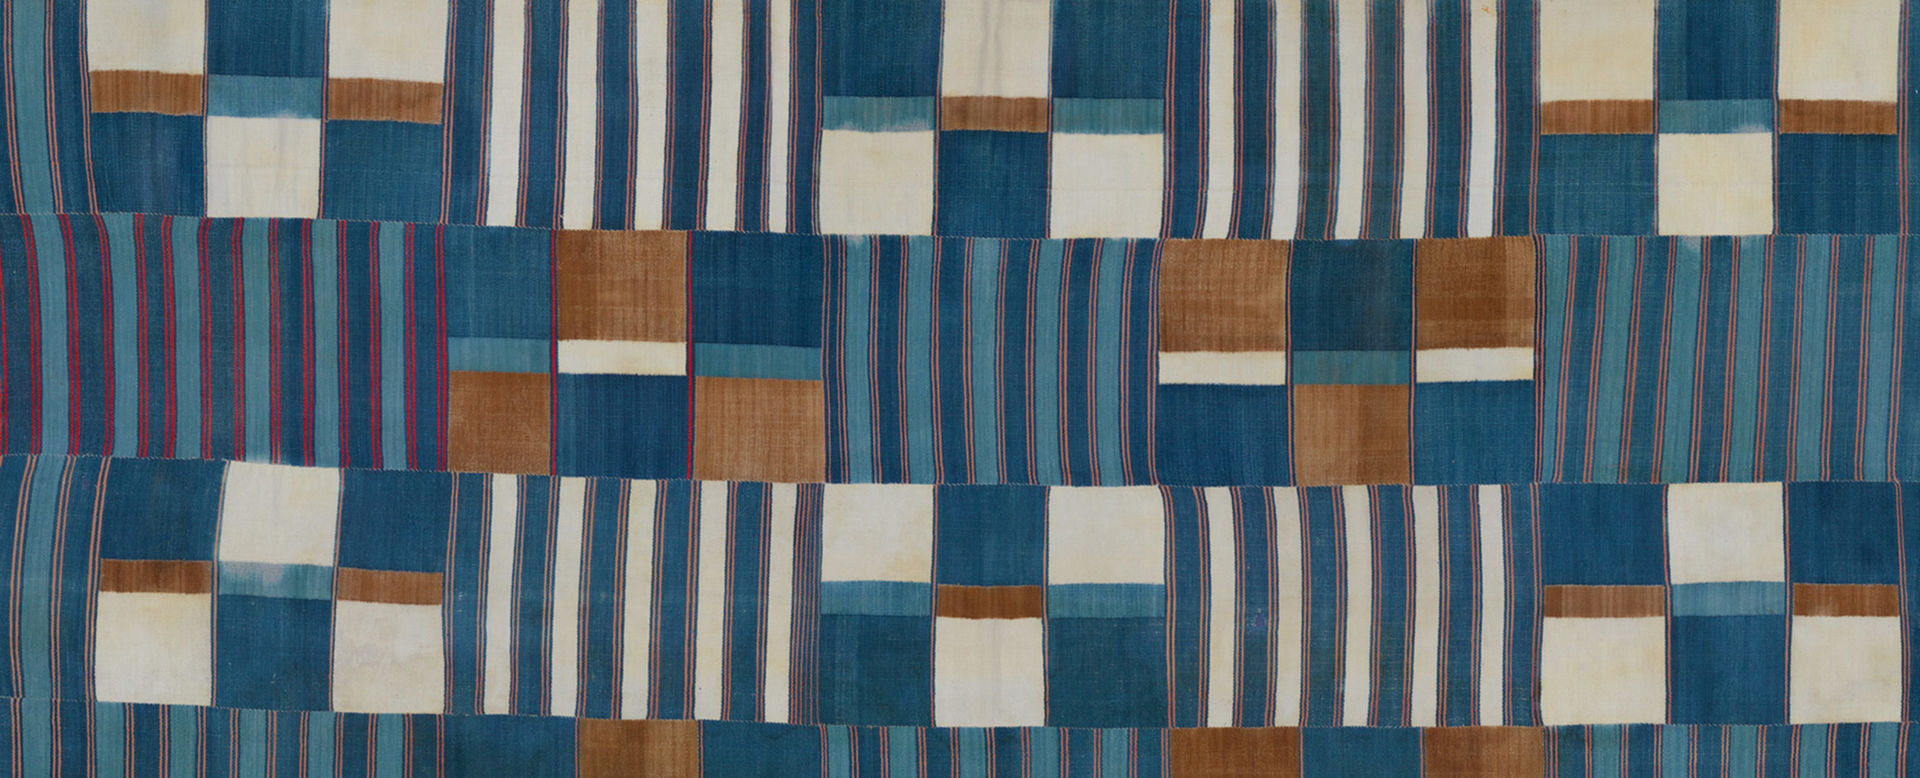 Detail of Prestige Hanging (Kpoikpoi), blue tapestry from Sierra Leona